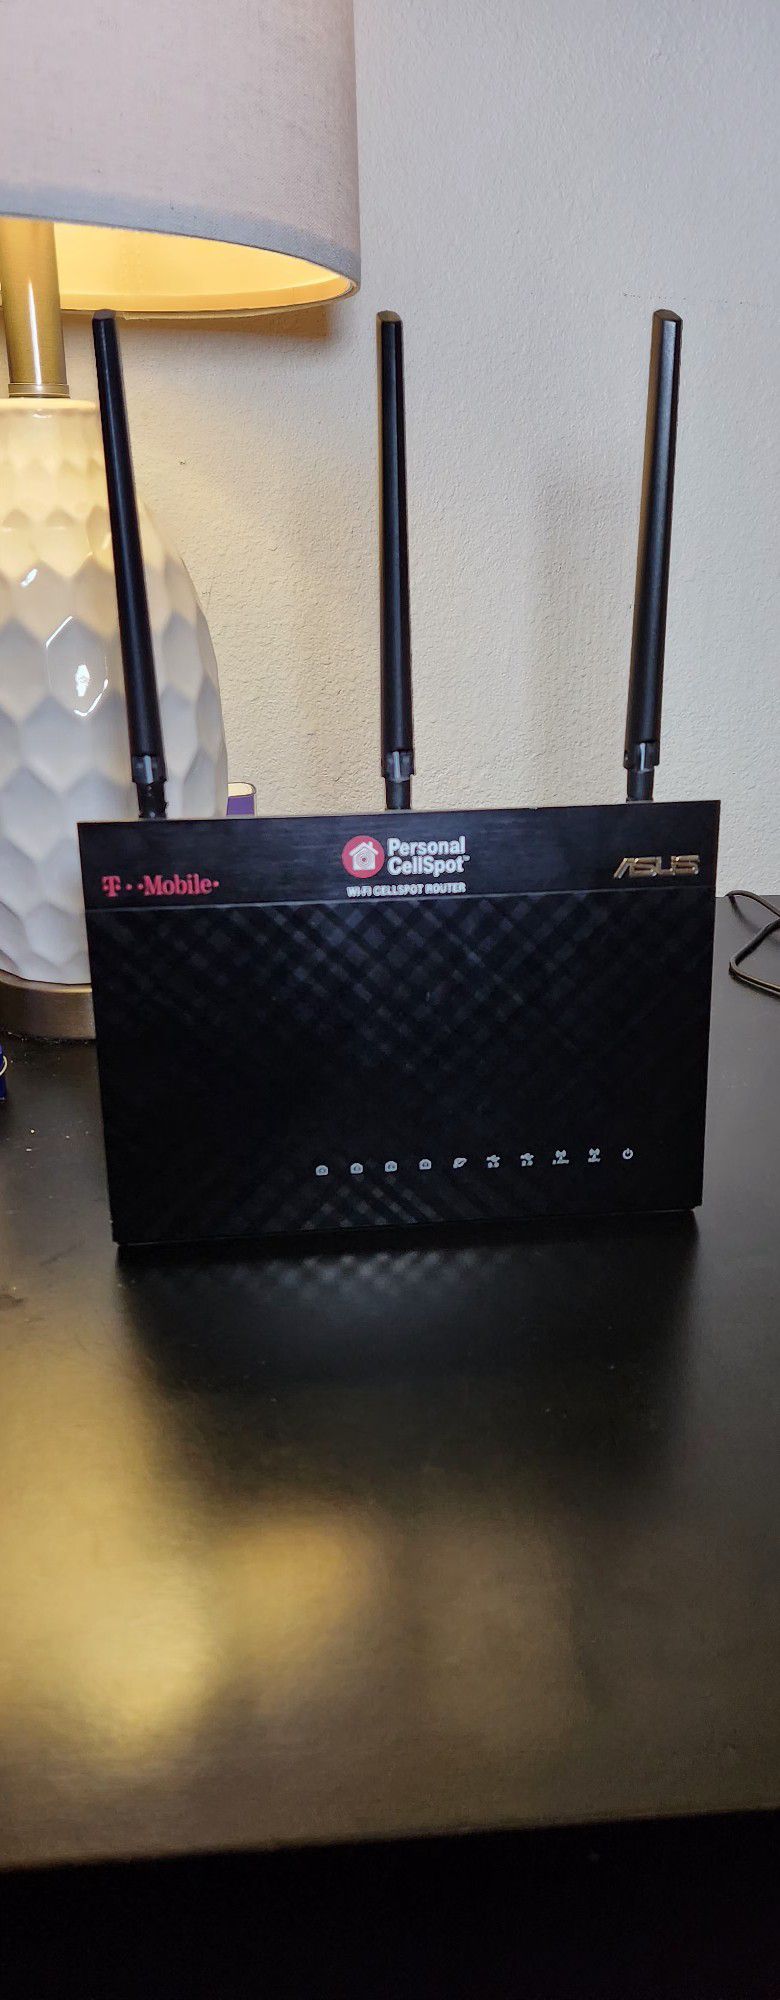 ASUS T-Mobile 802.11ac WiFi Router